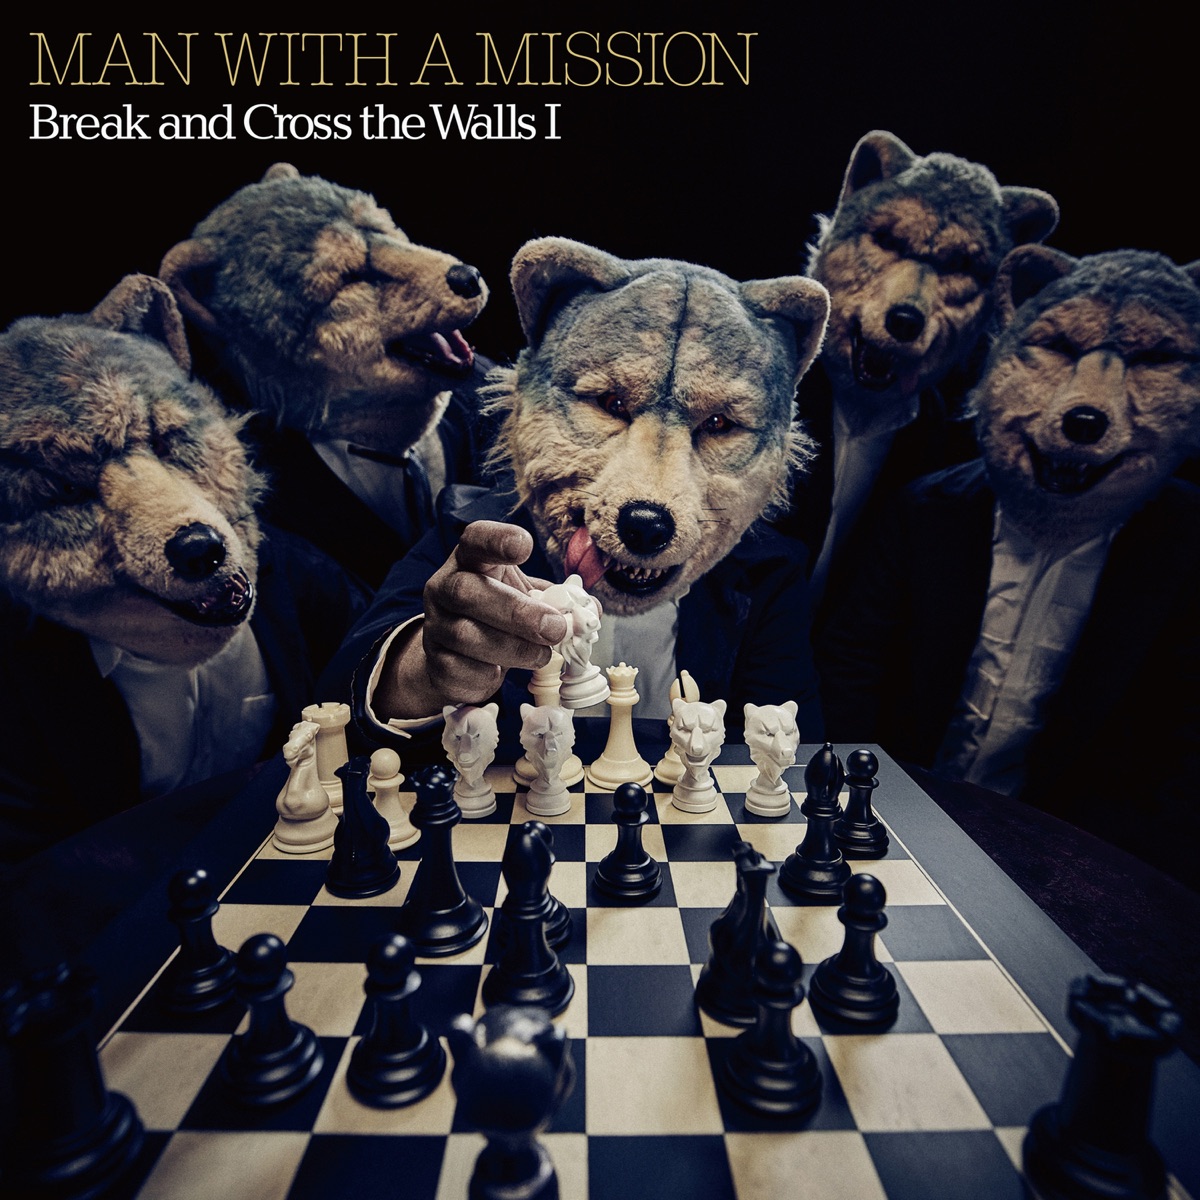 『MAN WITH A MISSION - Break and Cross the Walls』収録の『Break and Cross the Walls Ⅰ』ジャケット